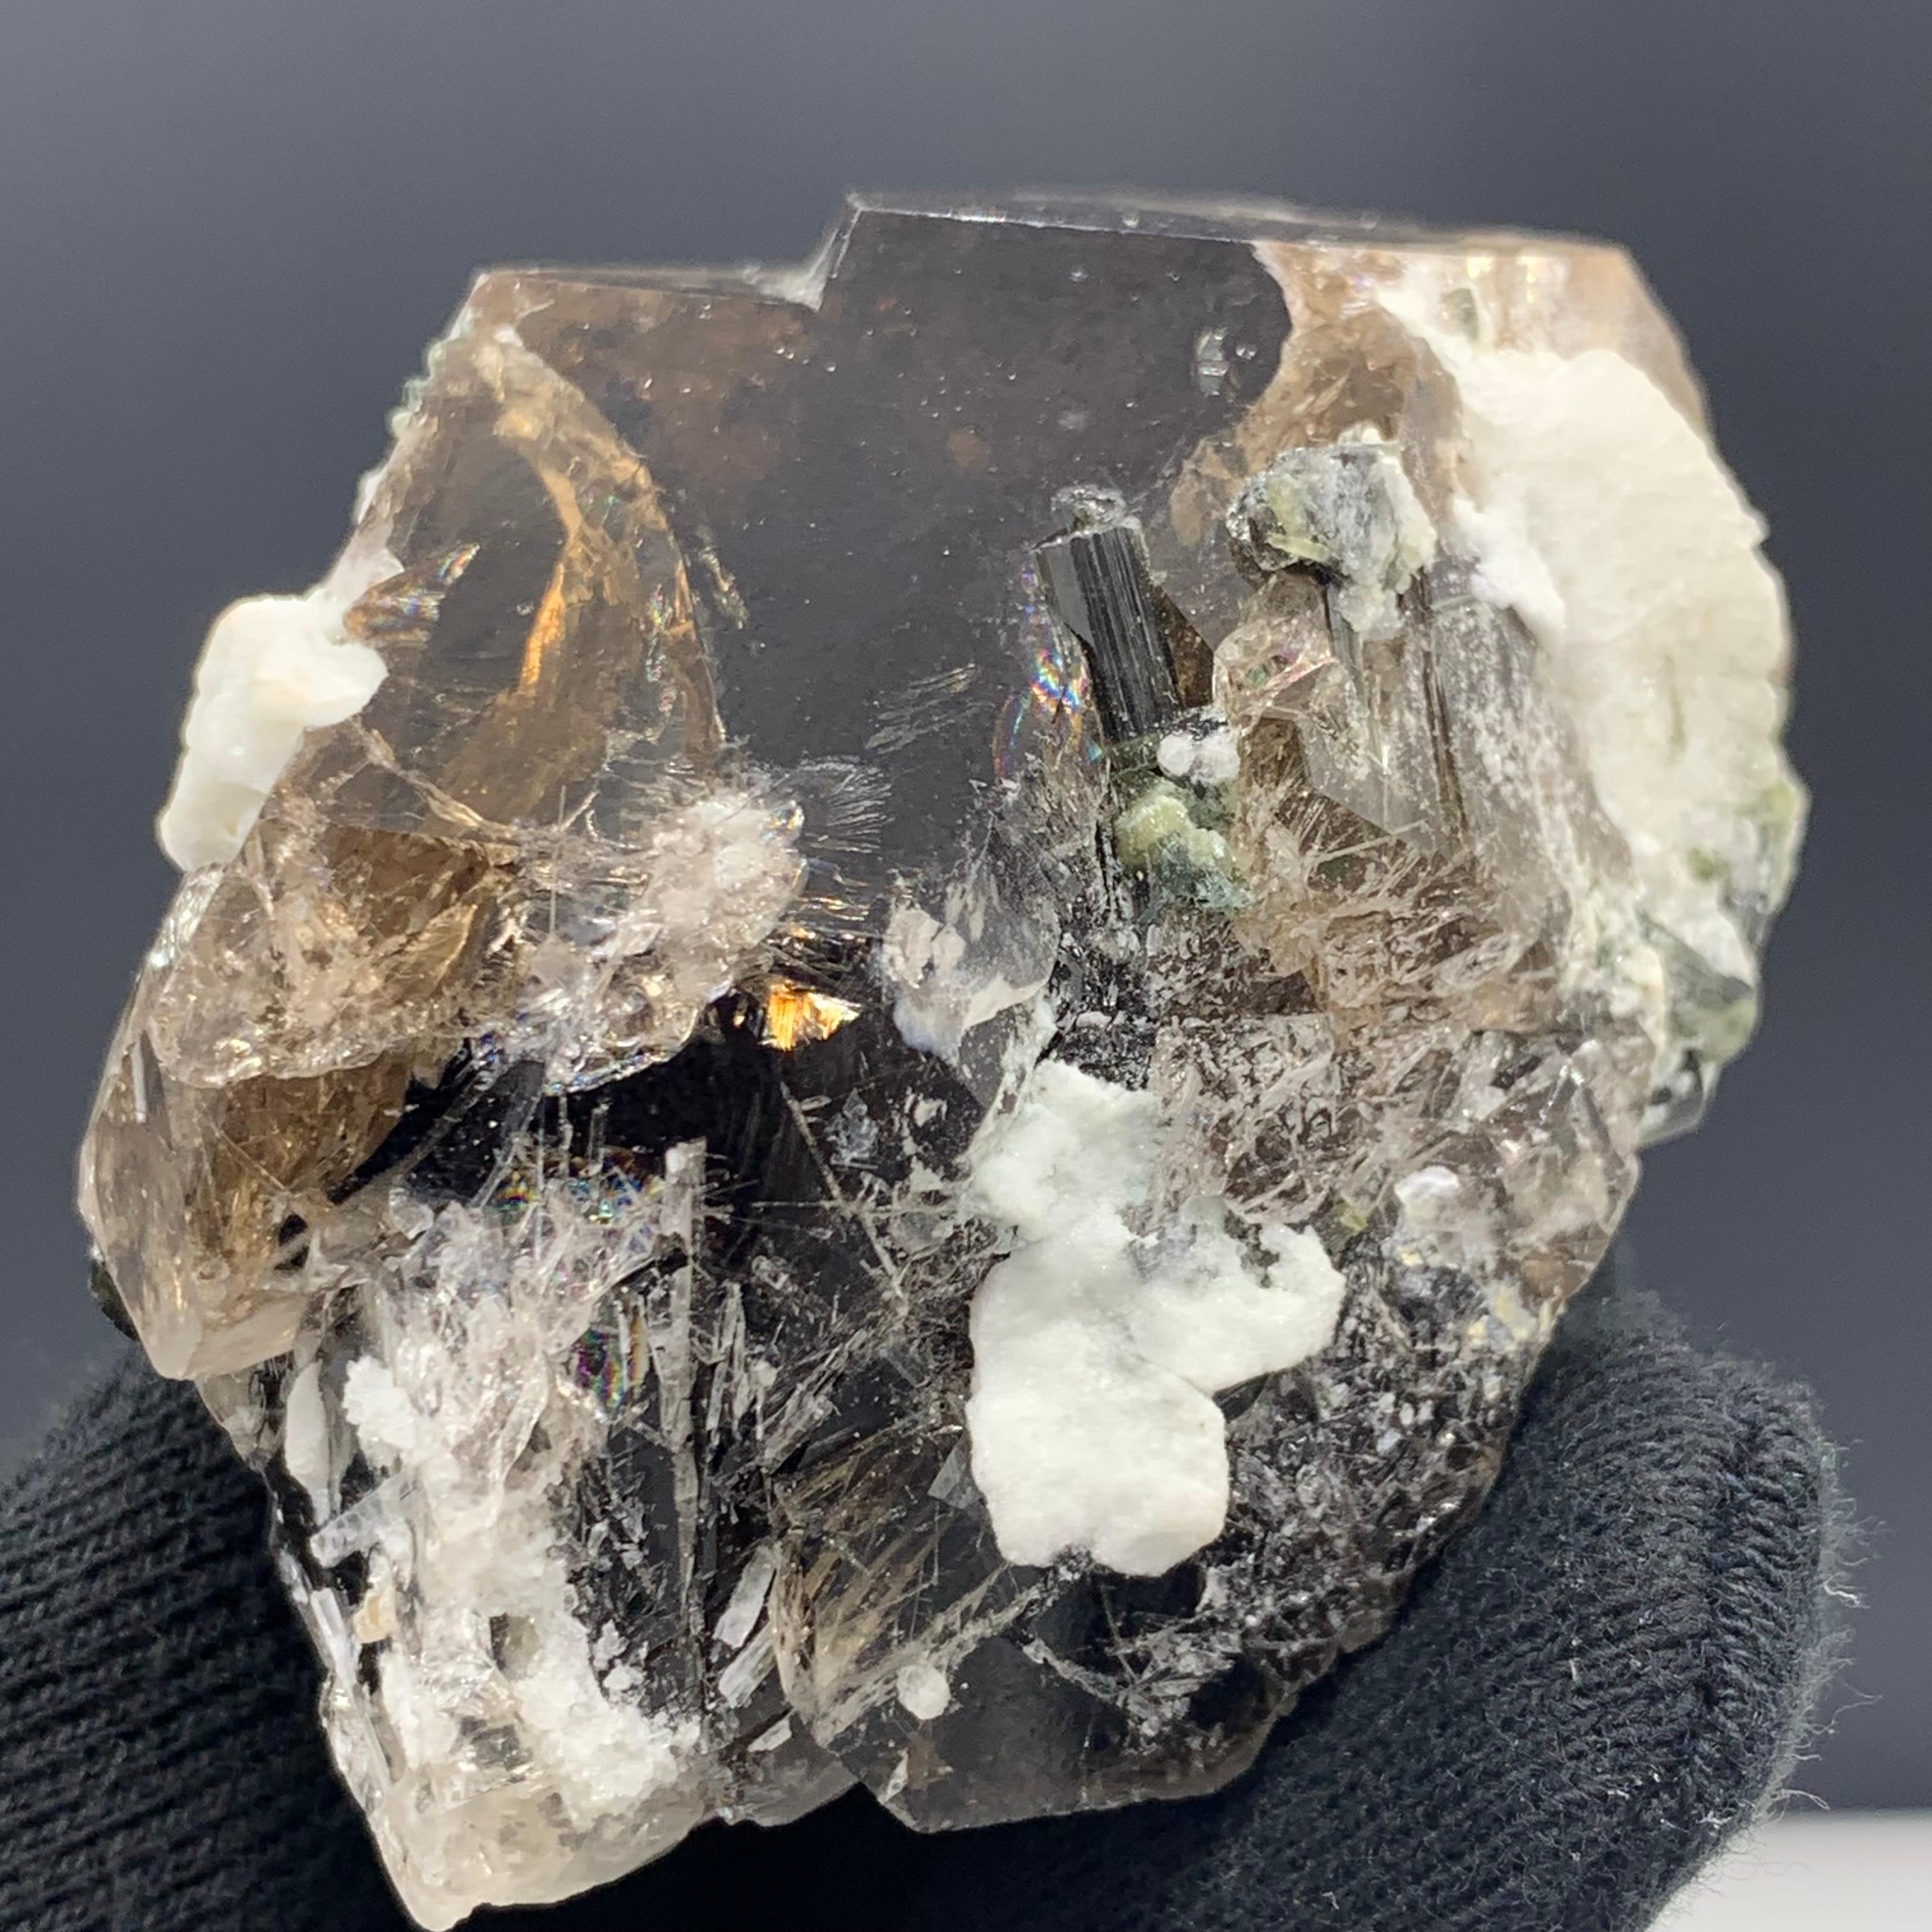 124.27 Gram Lovely Smoky Quartz With Tourmaline Crystals From Skardu, Pakistan 

Weight: 124.27 Gram 
Dimension:4.8 x 6.7 x 4.5 Cm
Origin: Skardu, Pakistan 

Smoky quartz is known for dispersing fear or negativity and removing depression. It can be